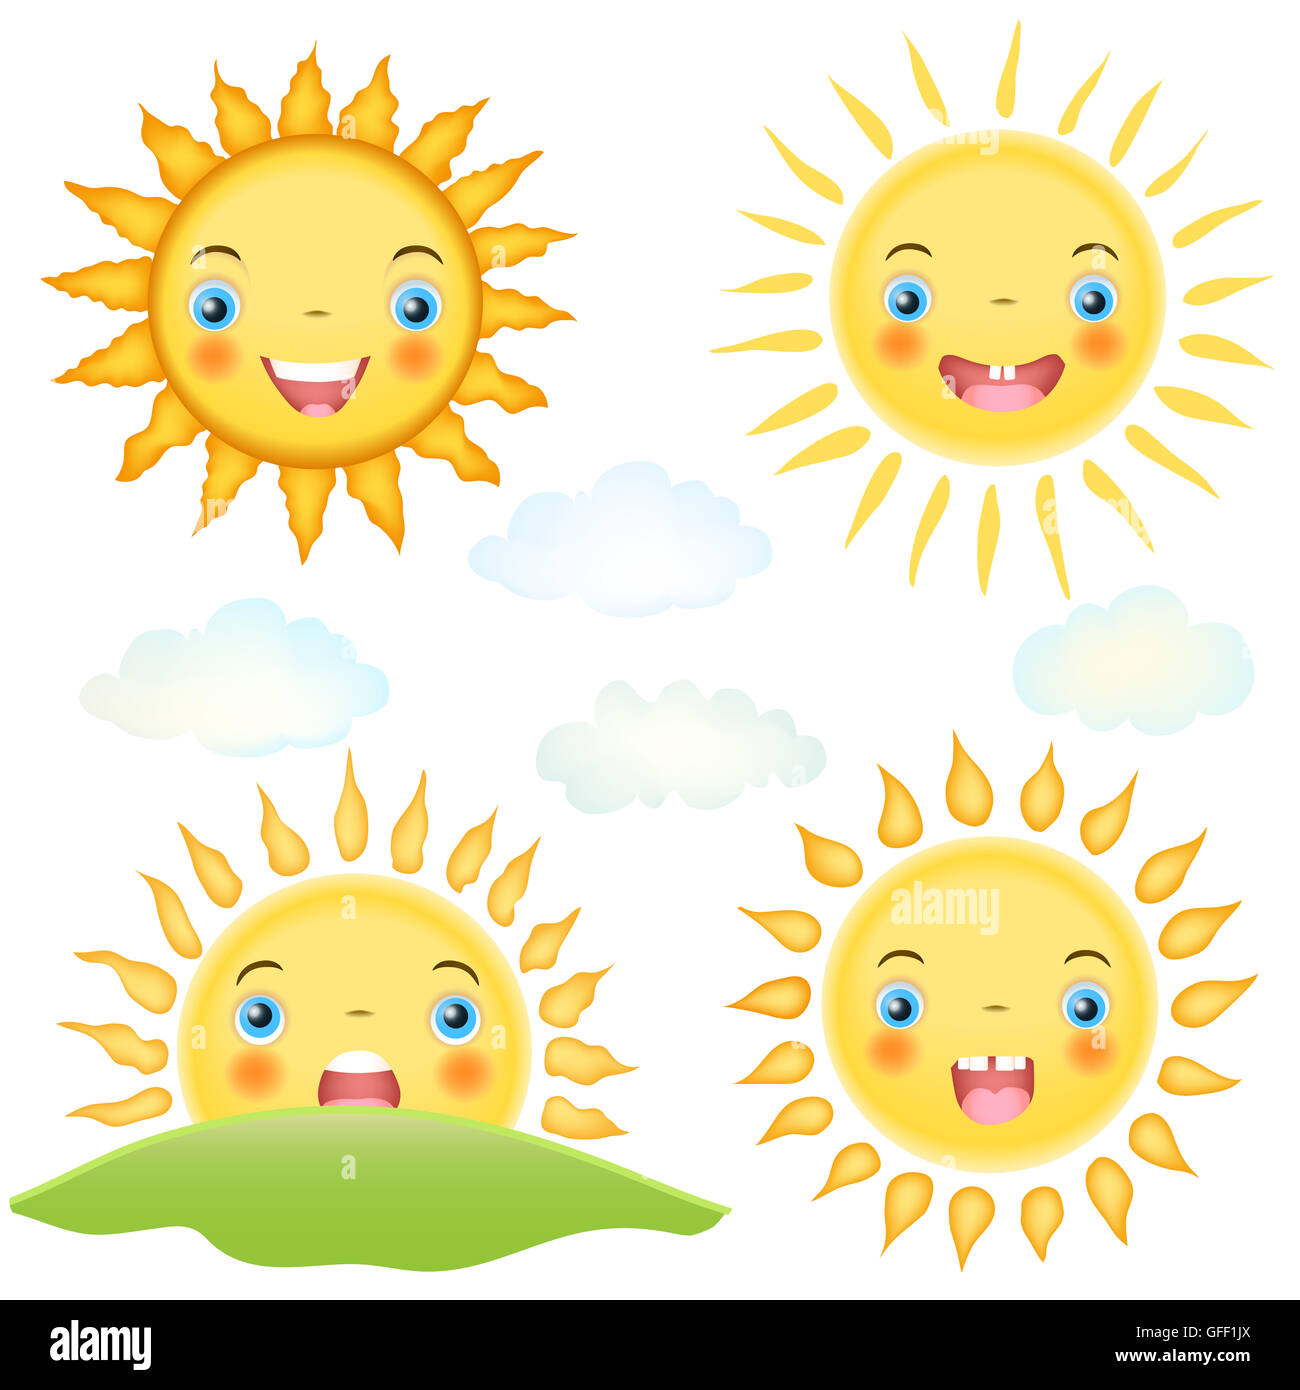 set of cartoon sun character and clouds on white. smiley faces for child theme illustrations Stock Photo